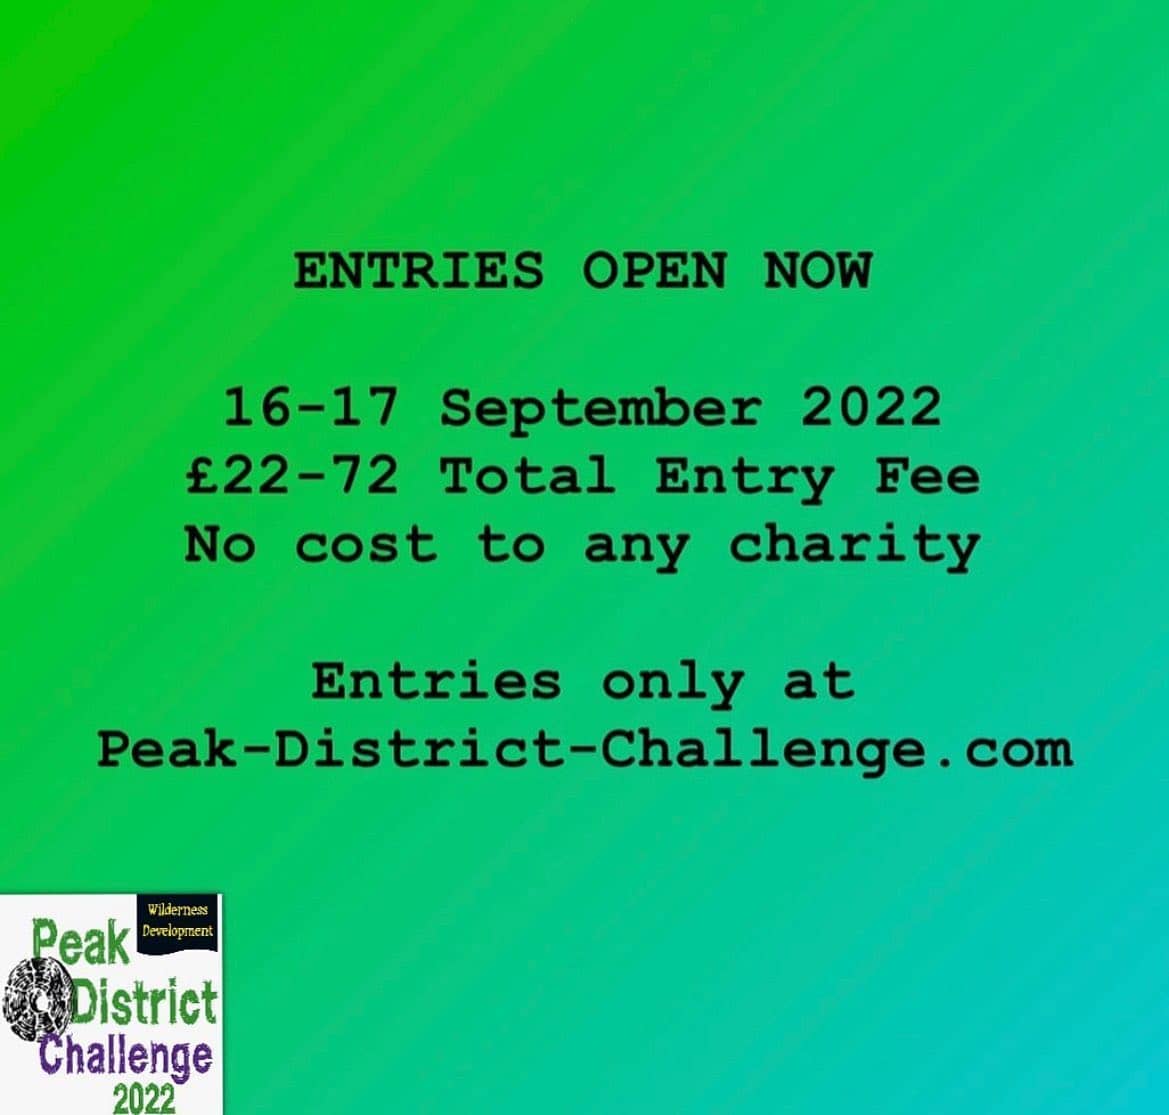 Peak-District-Challenge.com registrations are open with total entry fees of £22-72. 

Book with W...